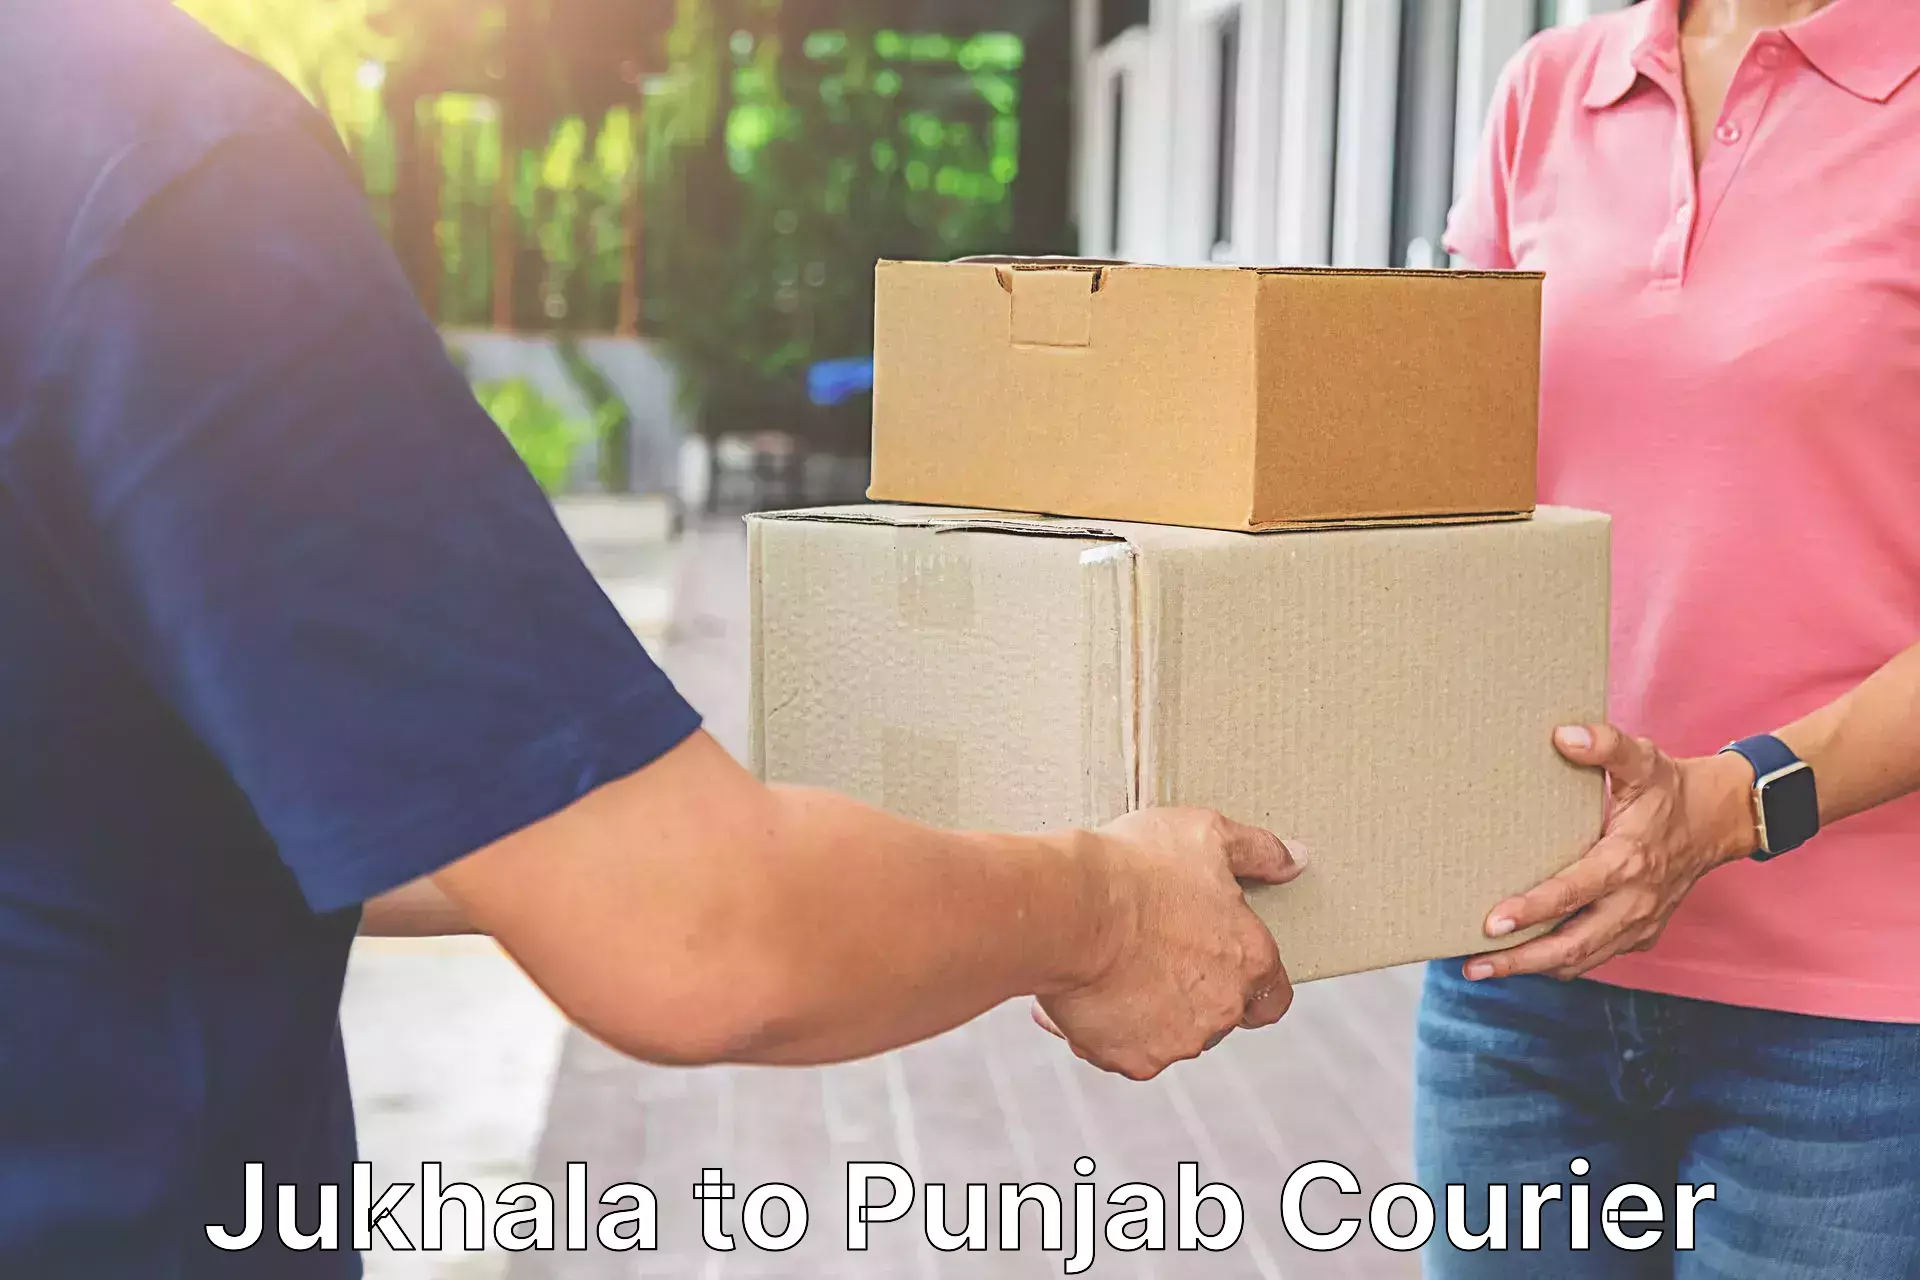 Multi-national courier services Jukhala to Mukerian